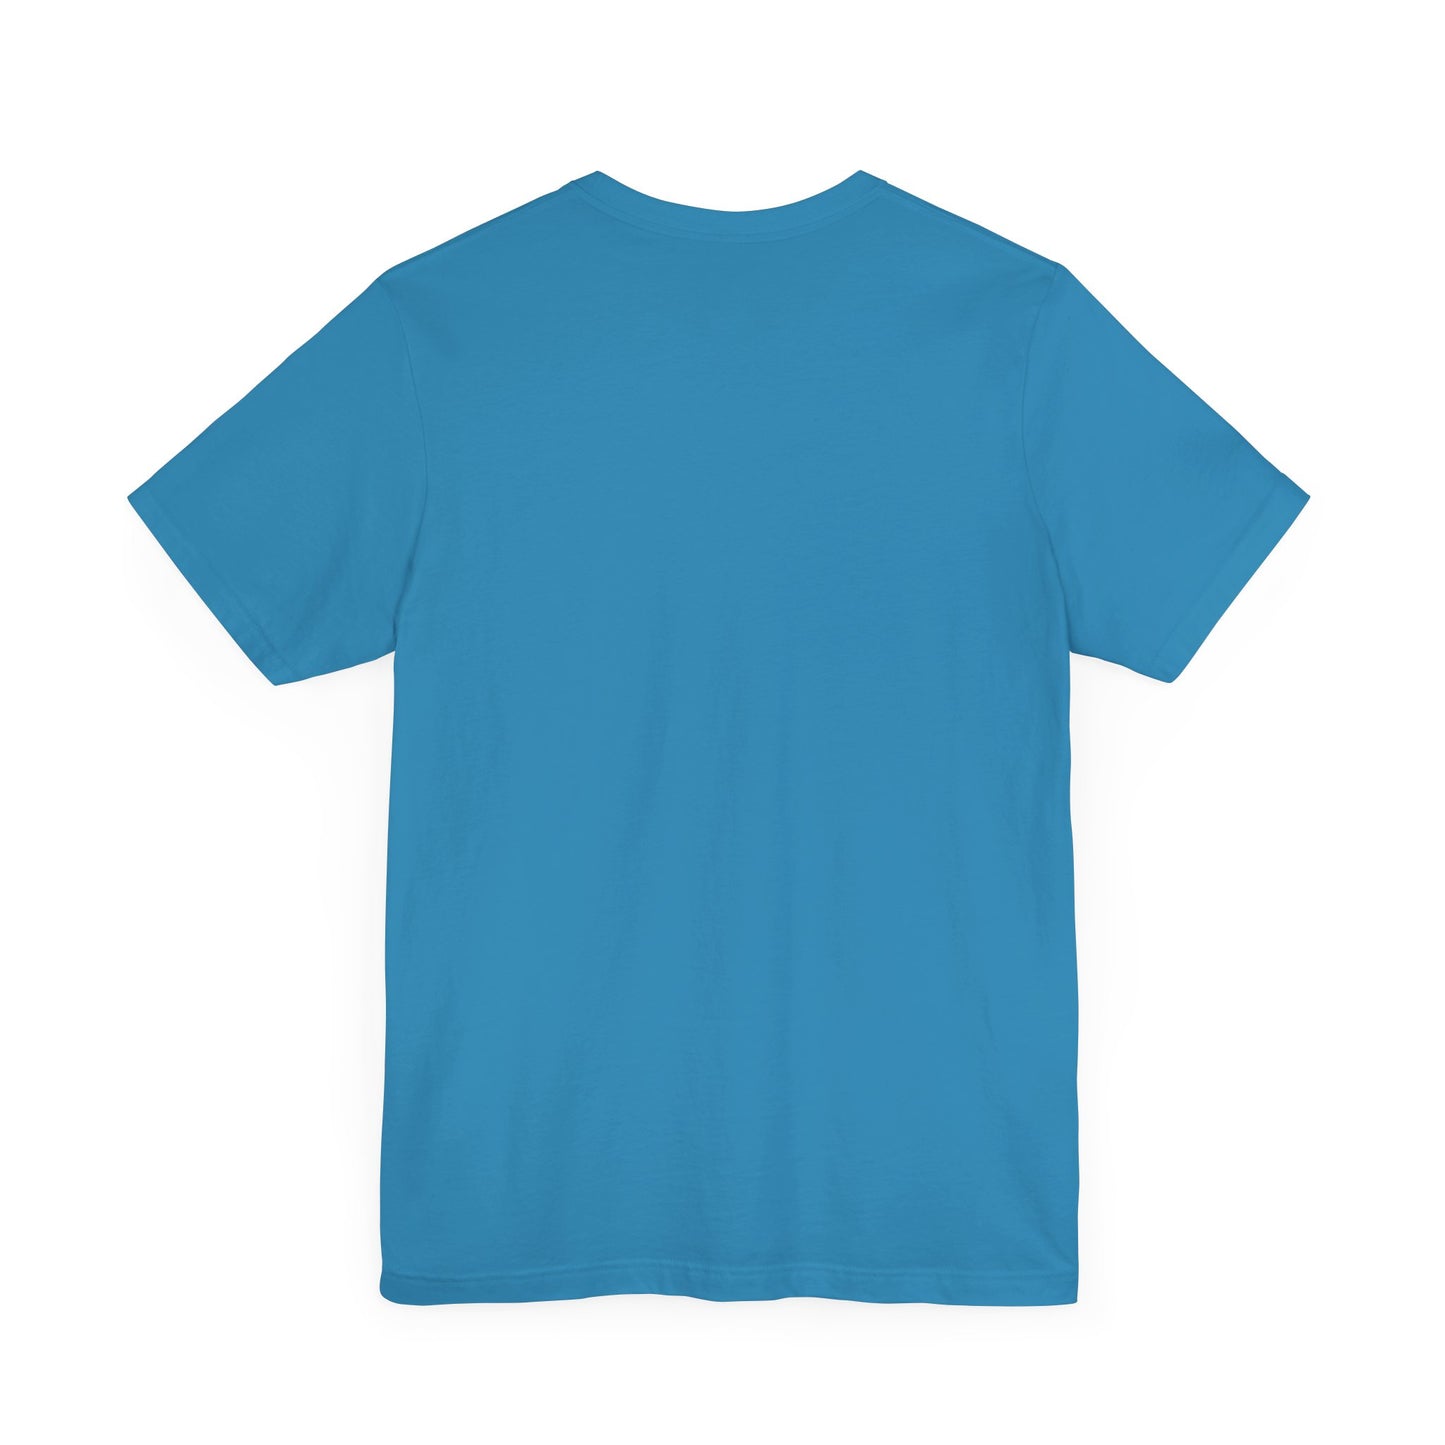 Inspirational "Be Kind" Unisex T-Shirt - 100% Airlume Cotton, Lightweight & Breathable